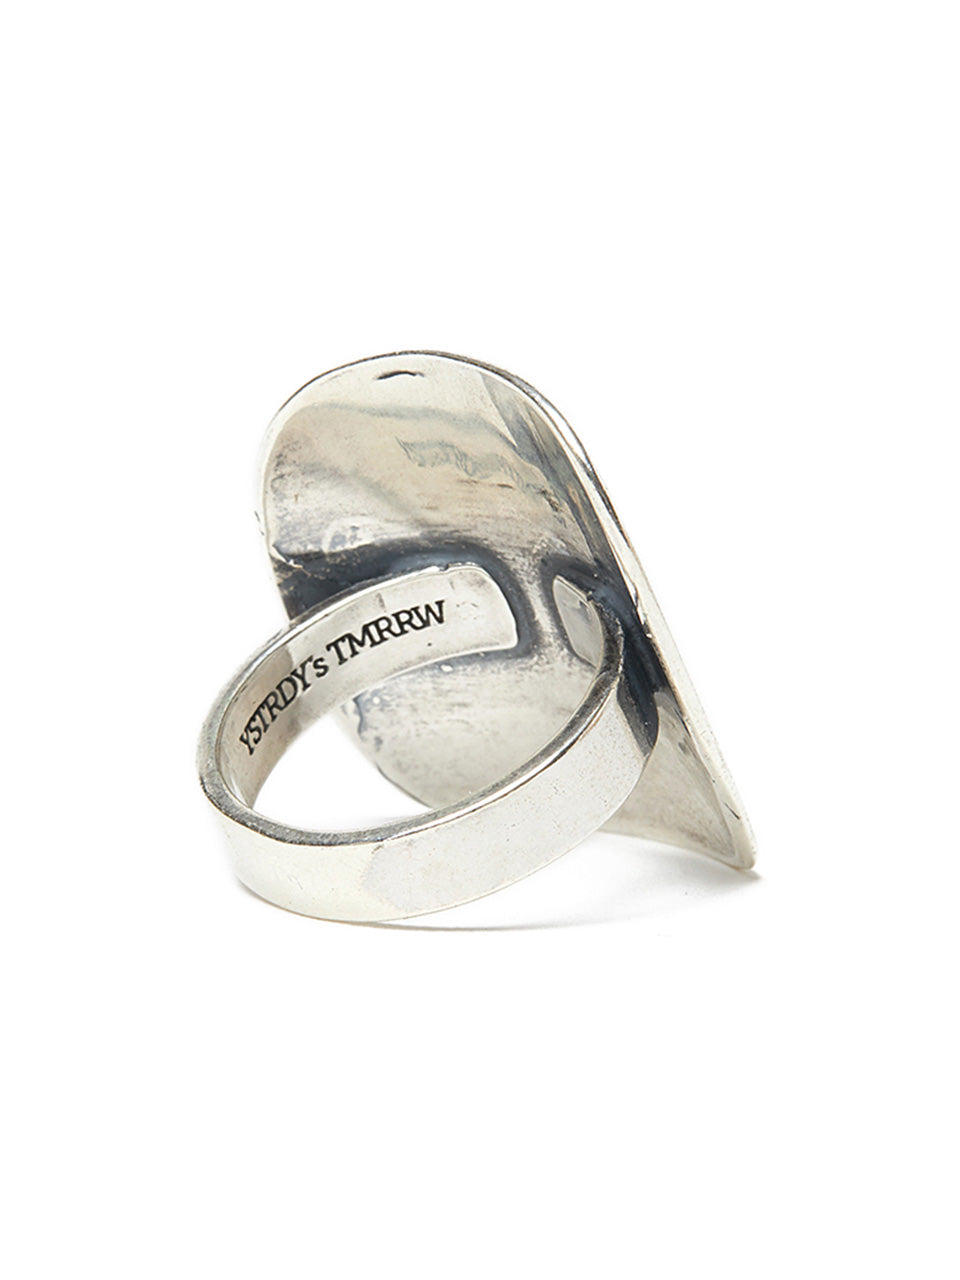 HK Pacifism Ring by END Side B (silver)